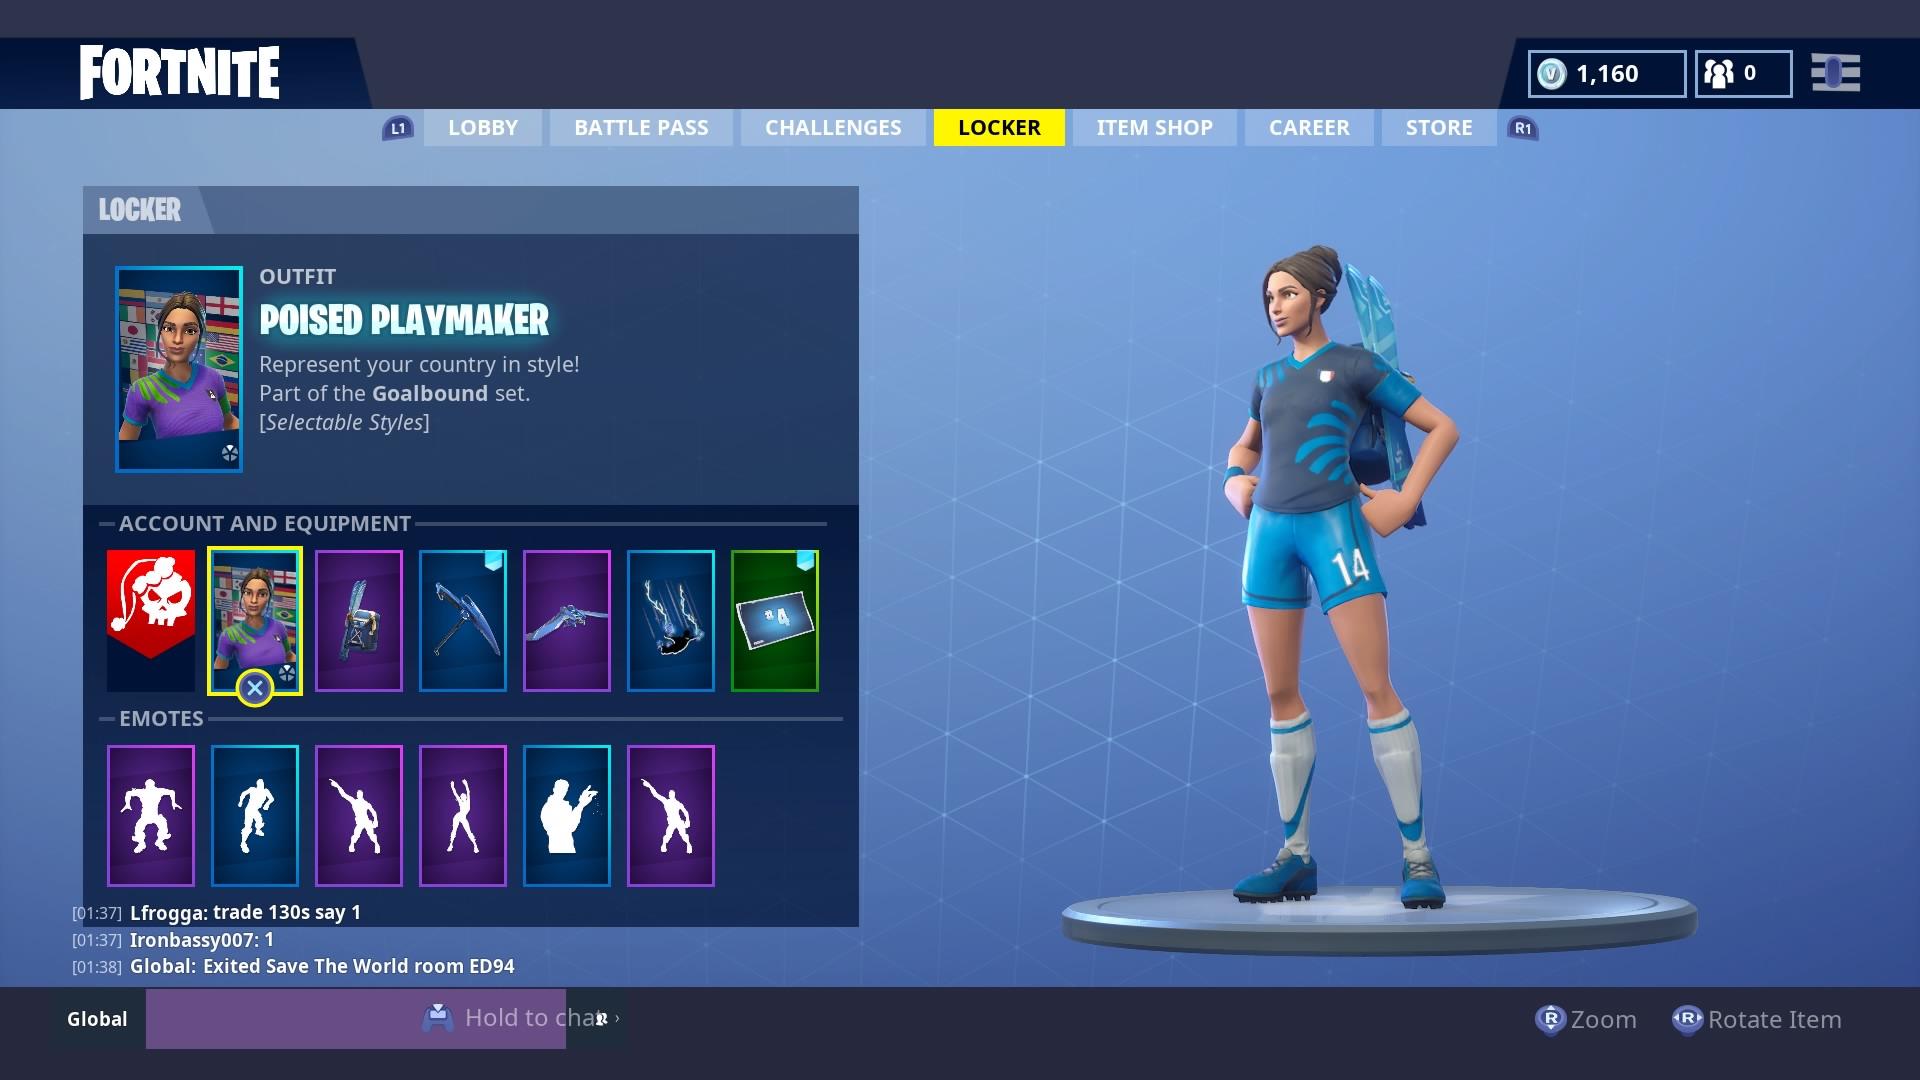 Poised Playmaker France With Alpine Ace Fortnitefashion